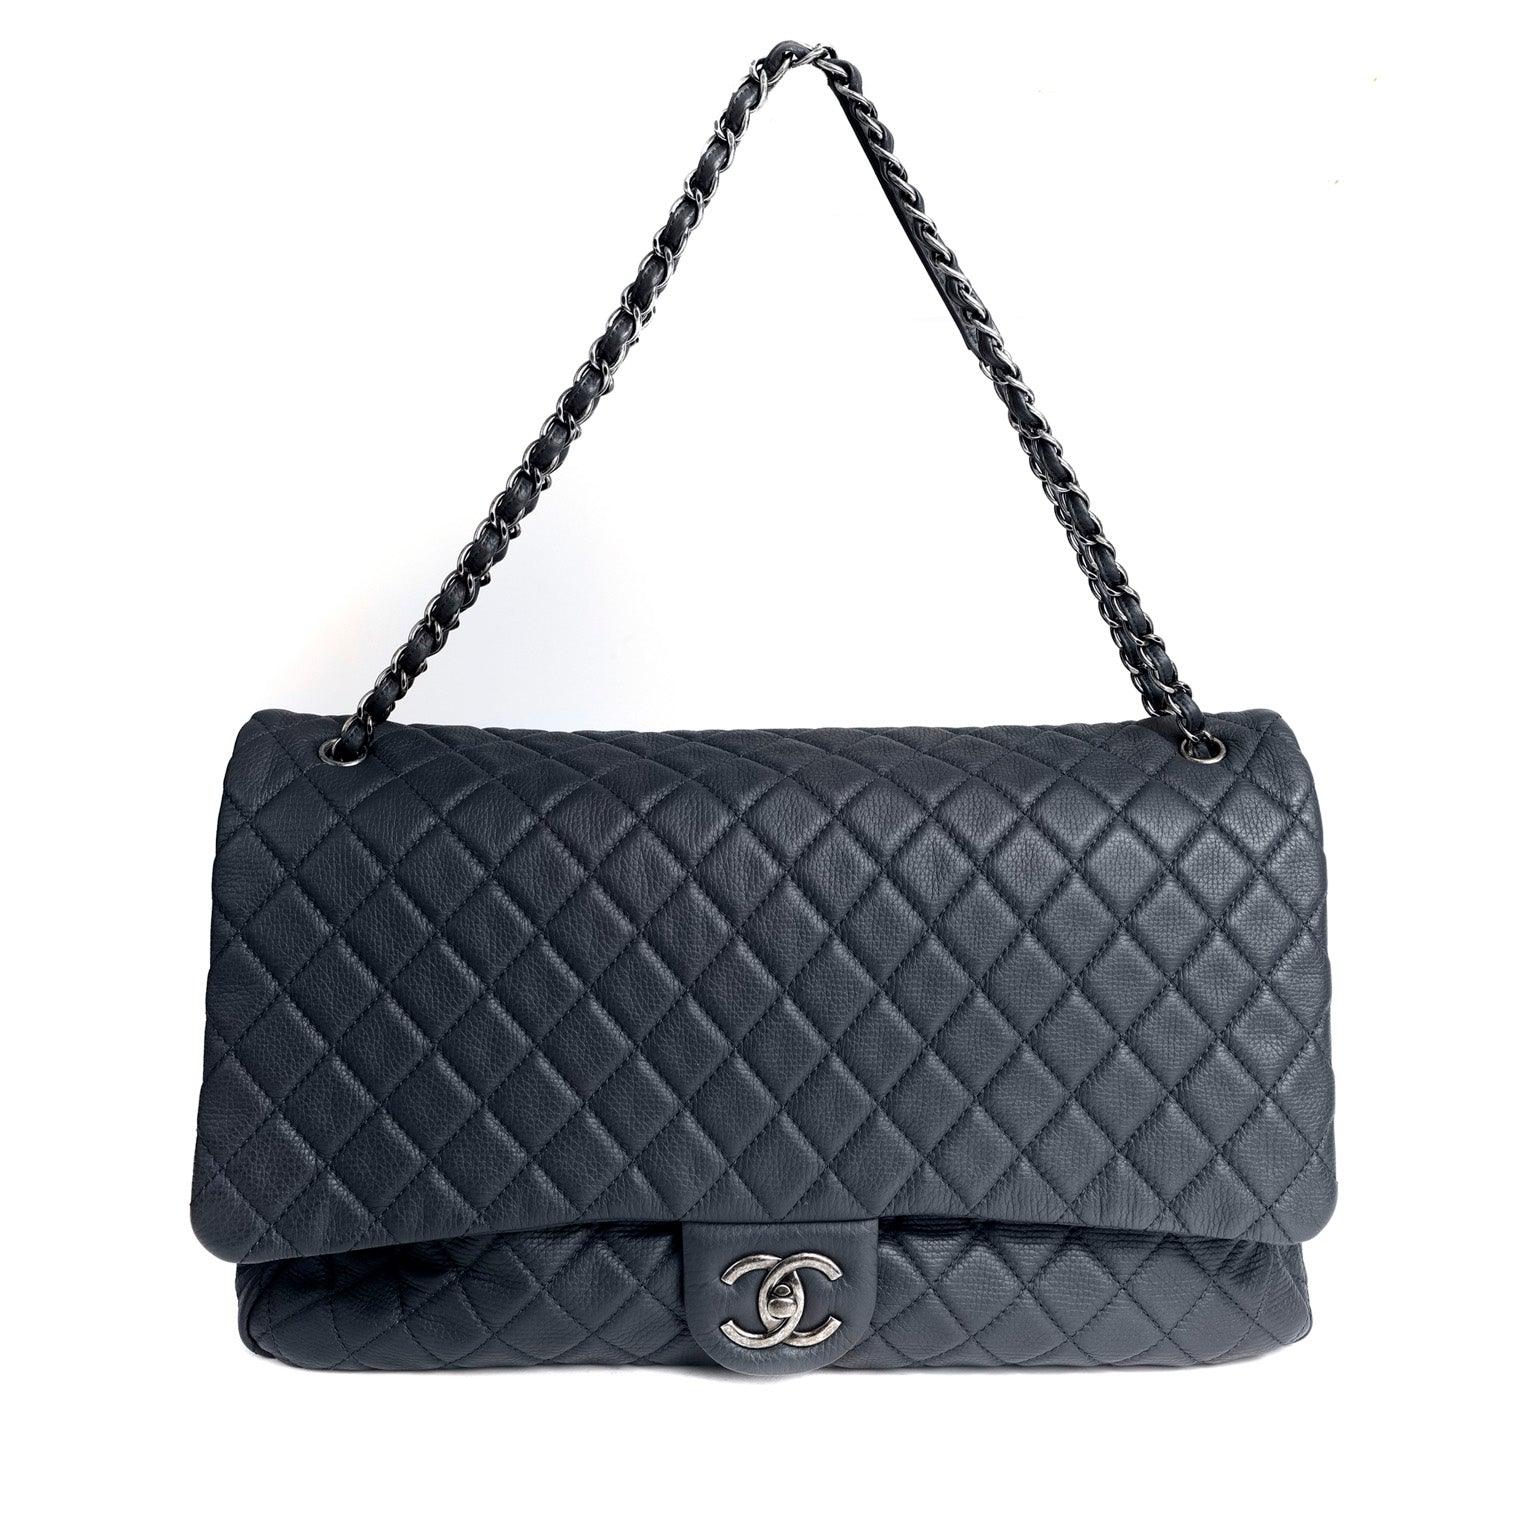 Get your hands on the stunning CHANEL NAVY XXL TRAVEL CLASSIC FLAP BAG,  made from top-quality navy lambskin leather – Only Authentics